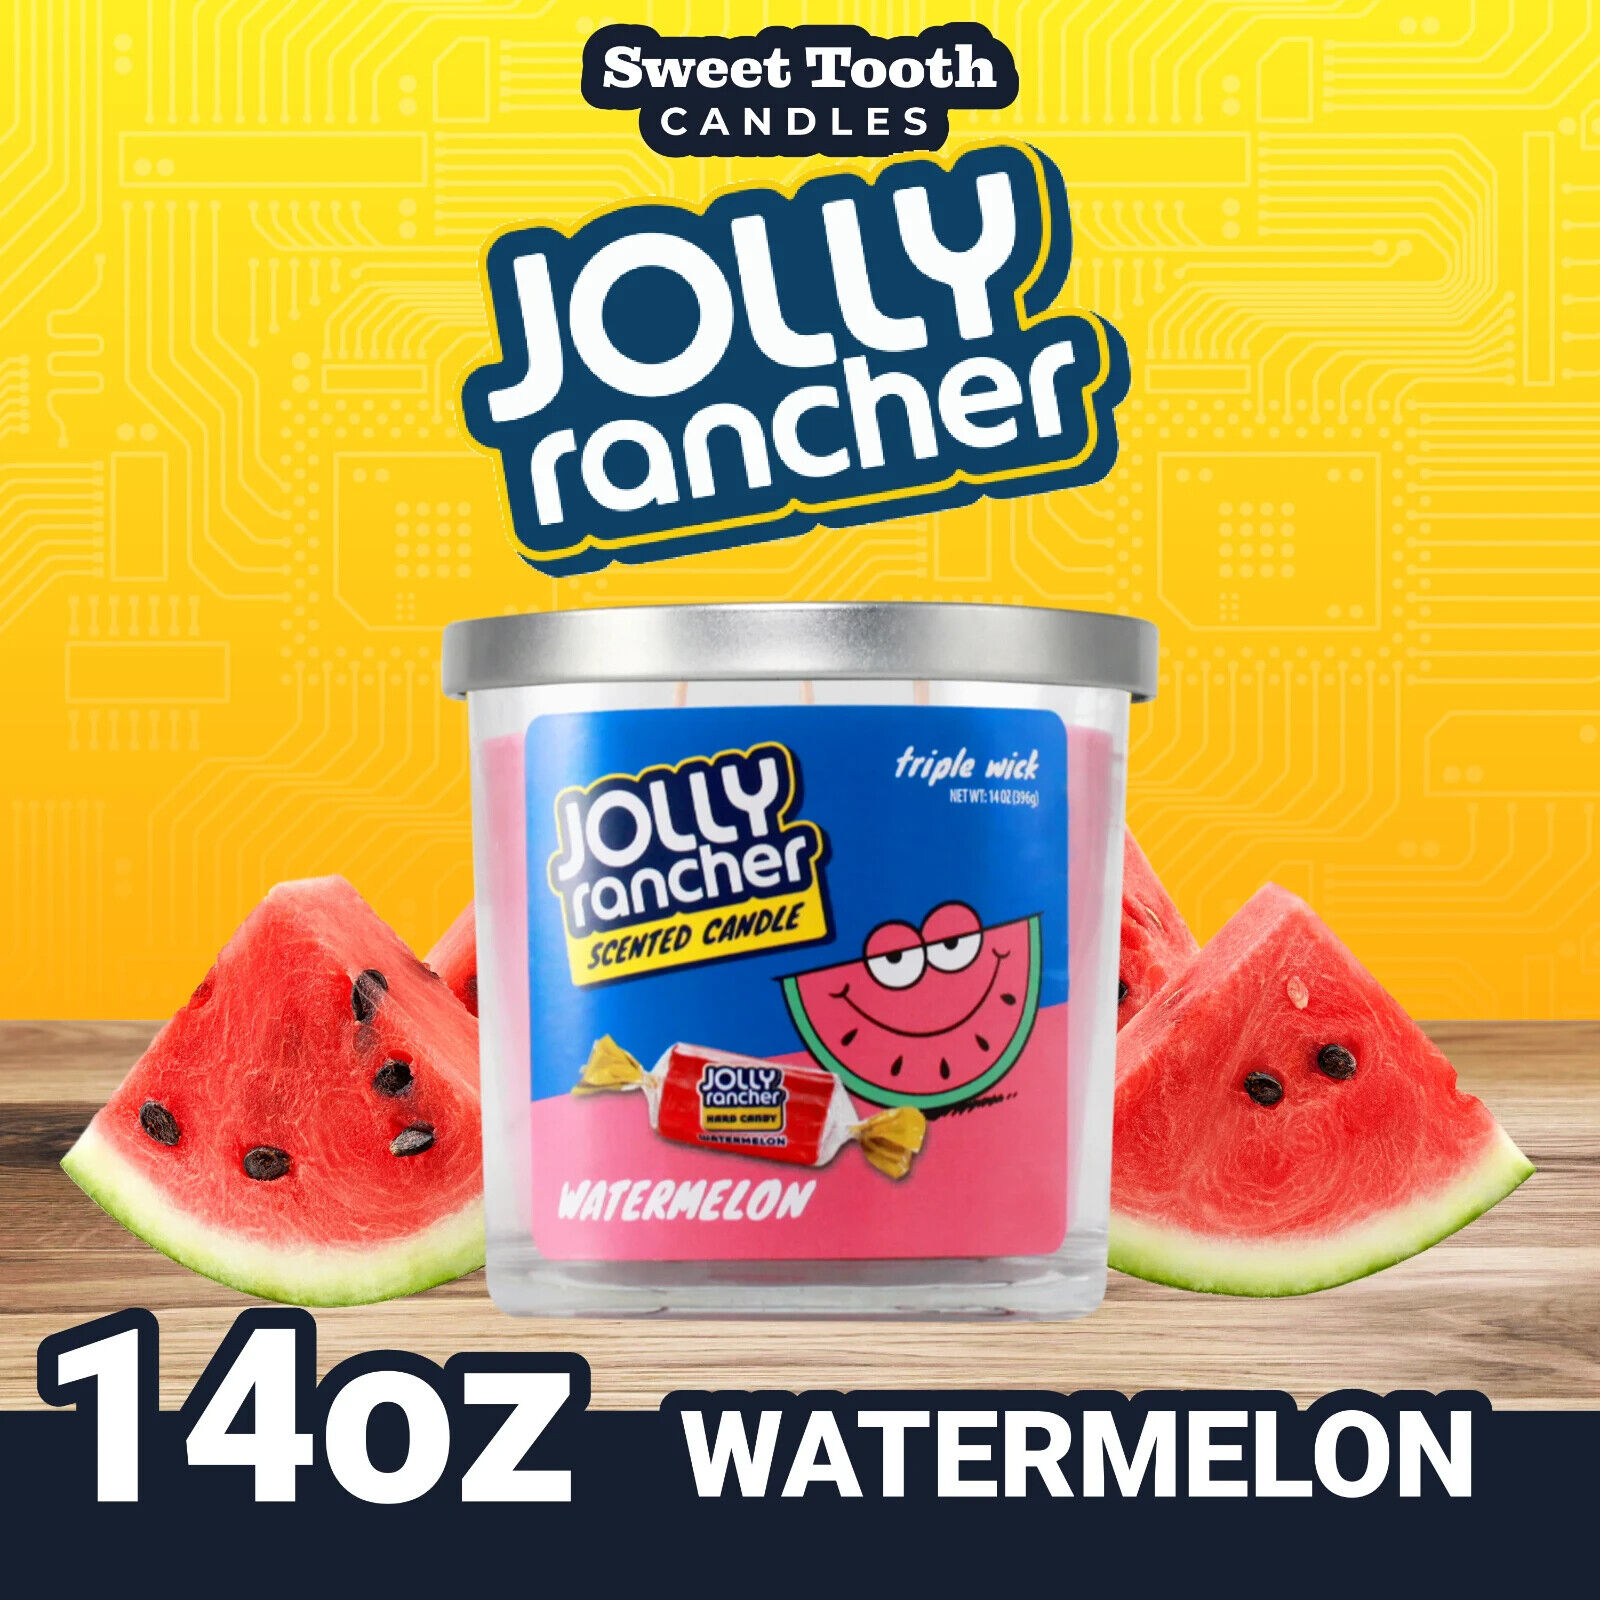 Candle - Watermelon Scented Candle 14 oz -JOLLY RANCHER WATERMELON 14 OZ